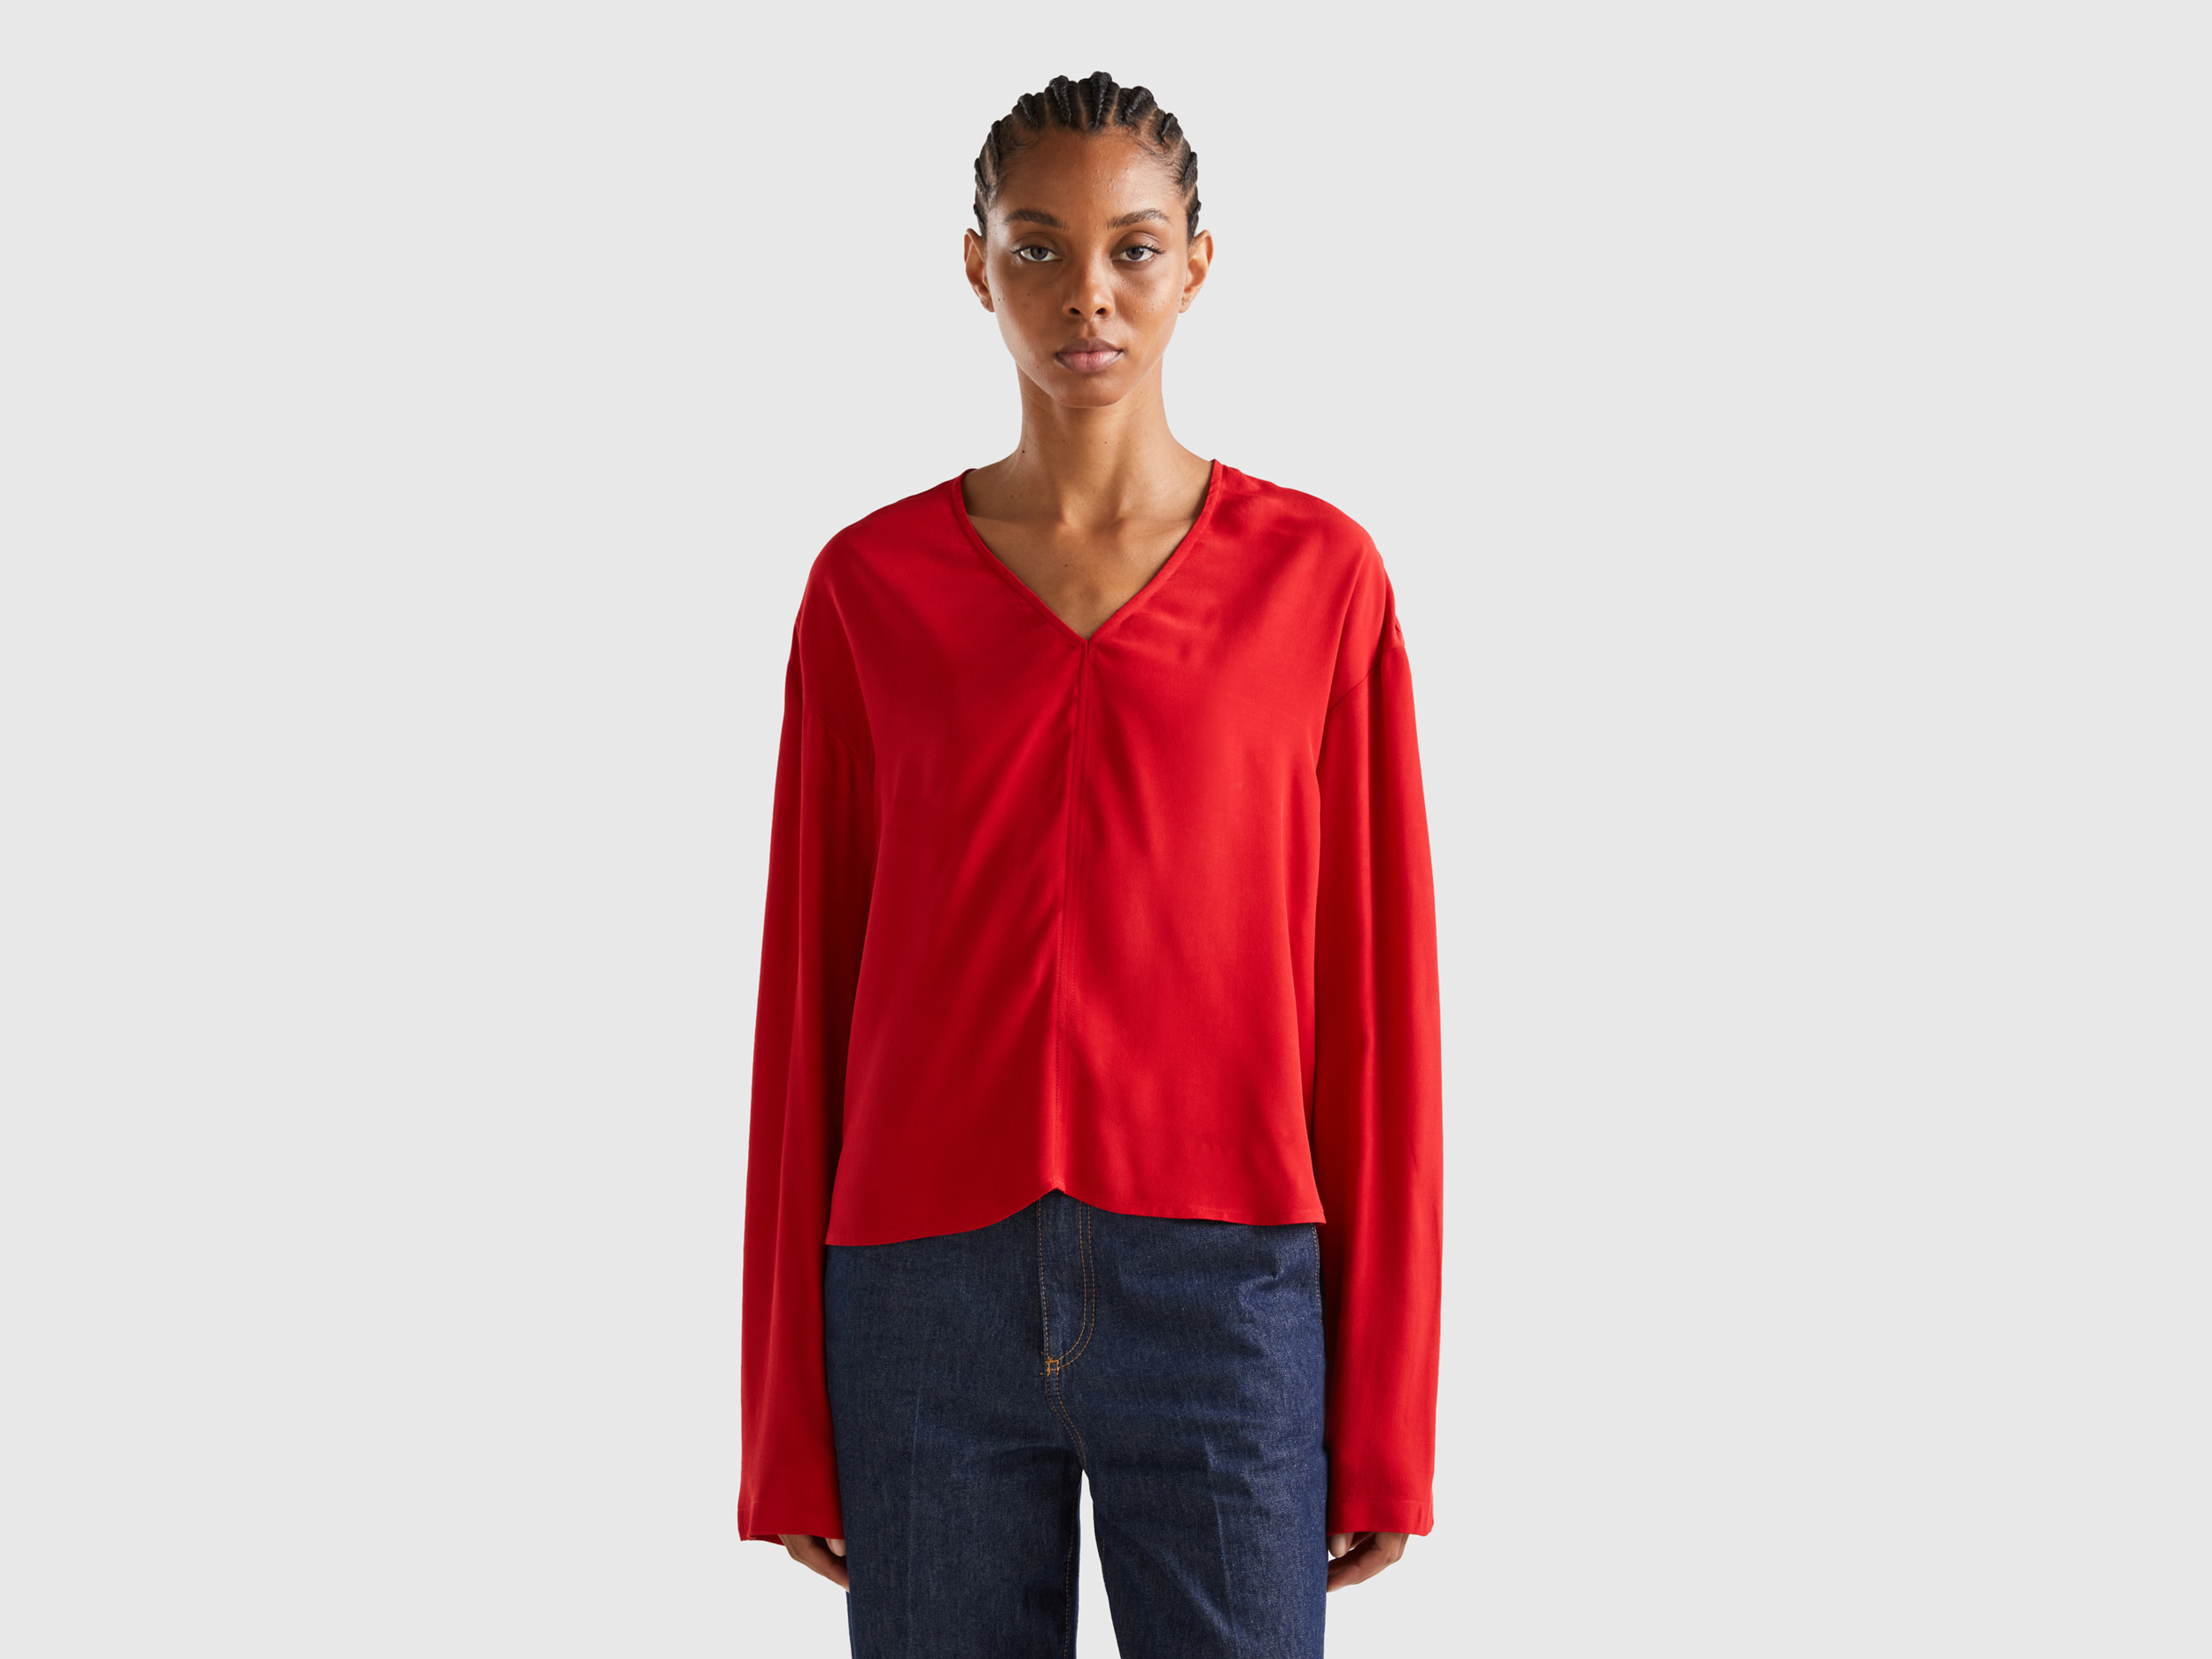 Benetton, Blouse With V-neck, size S, Red, Women